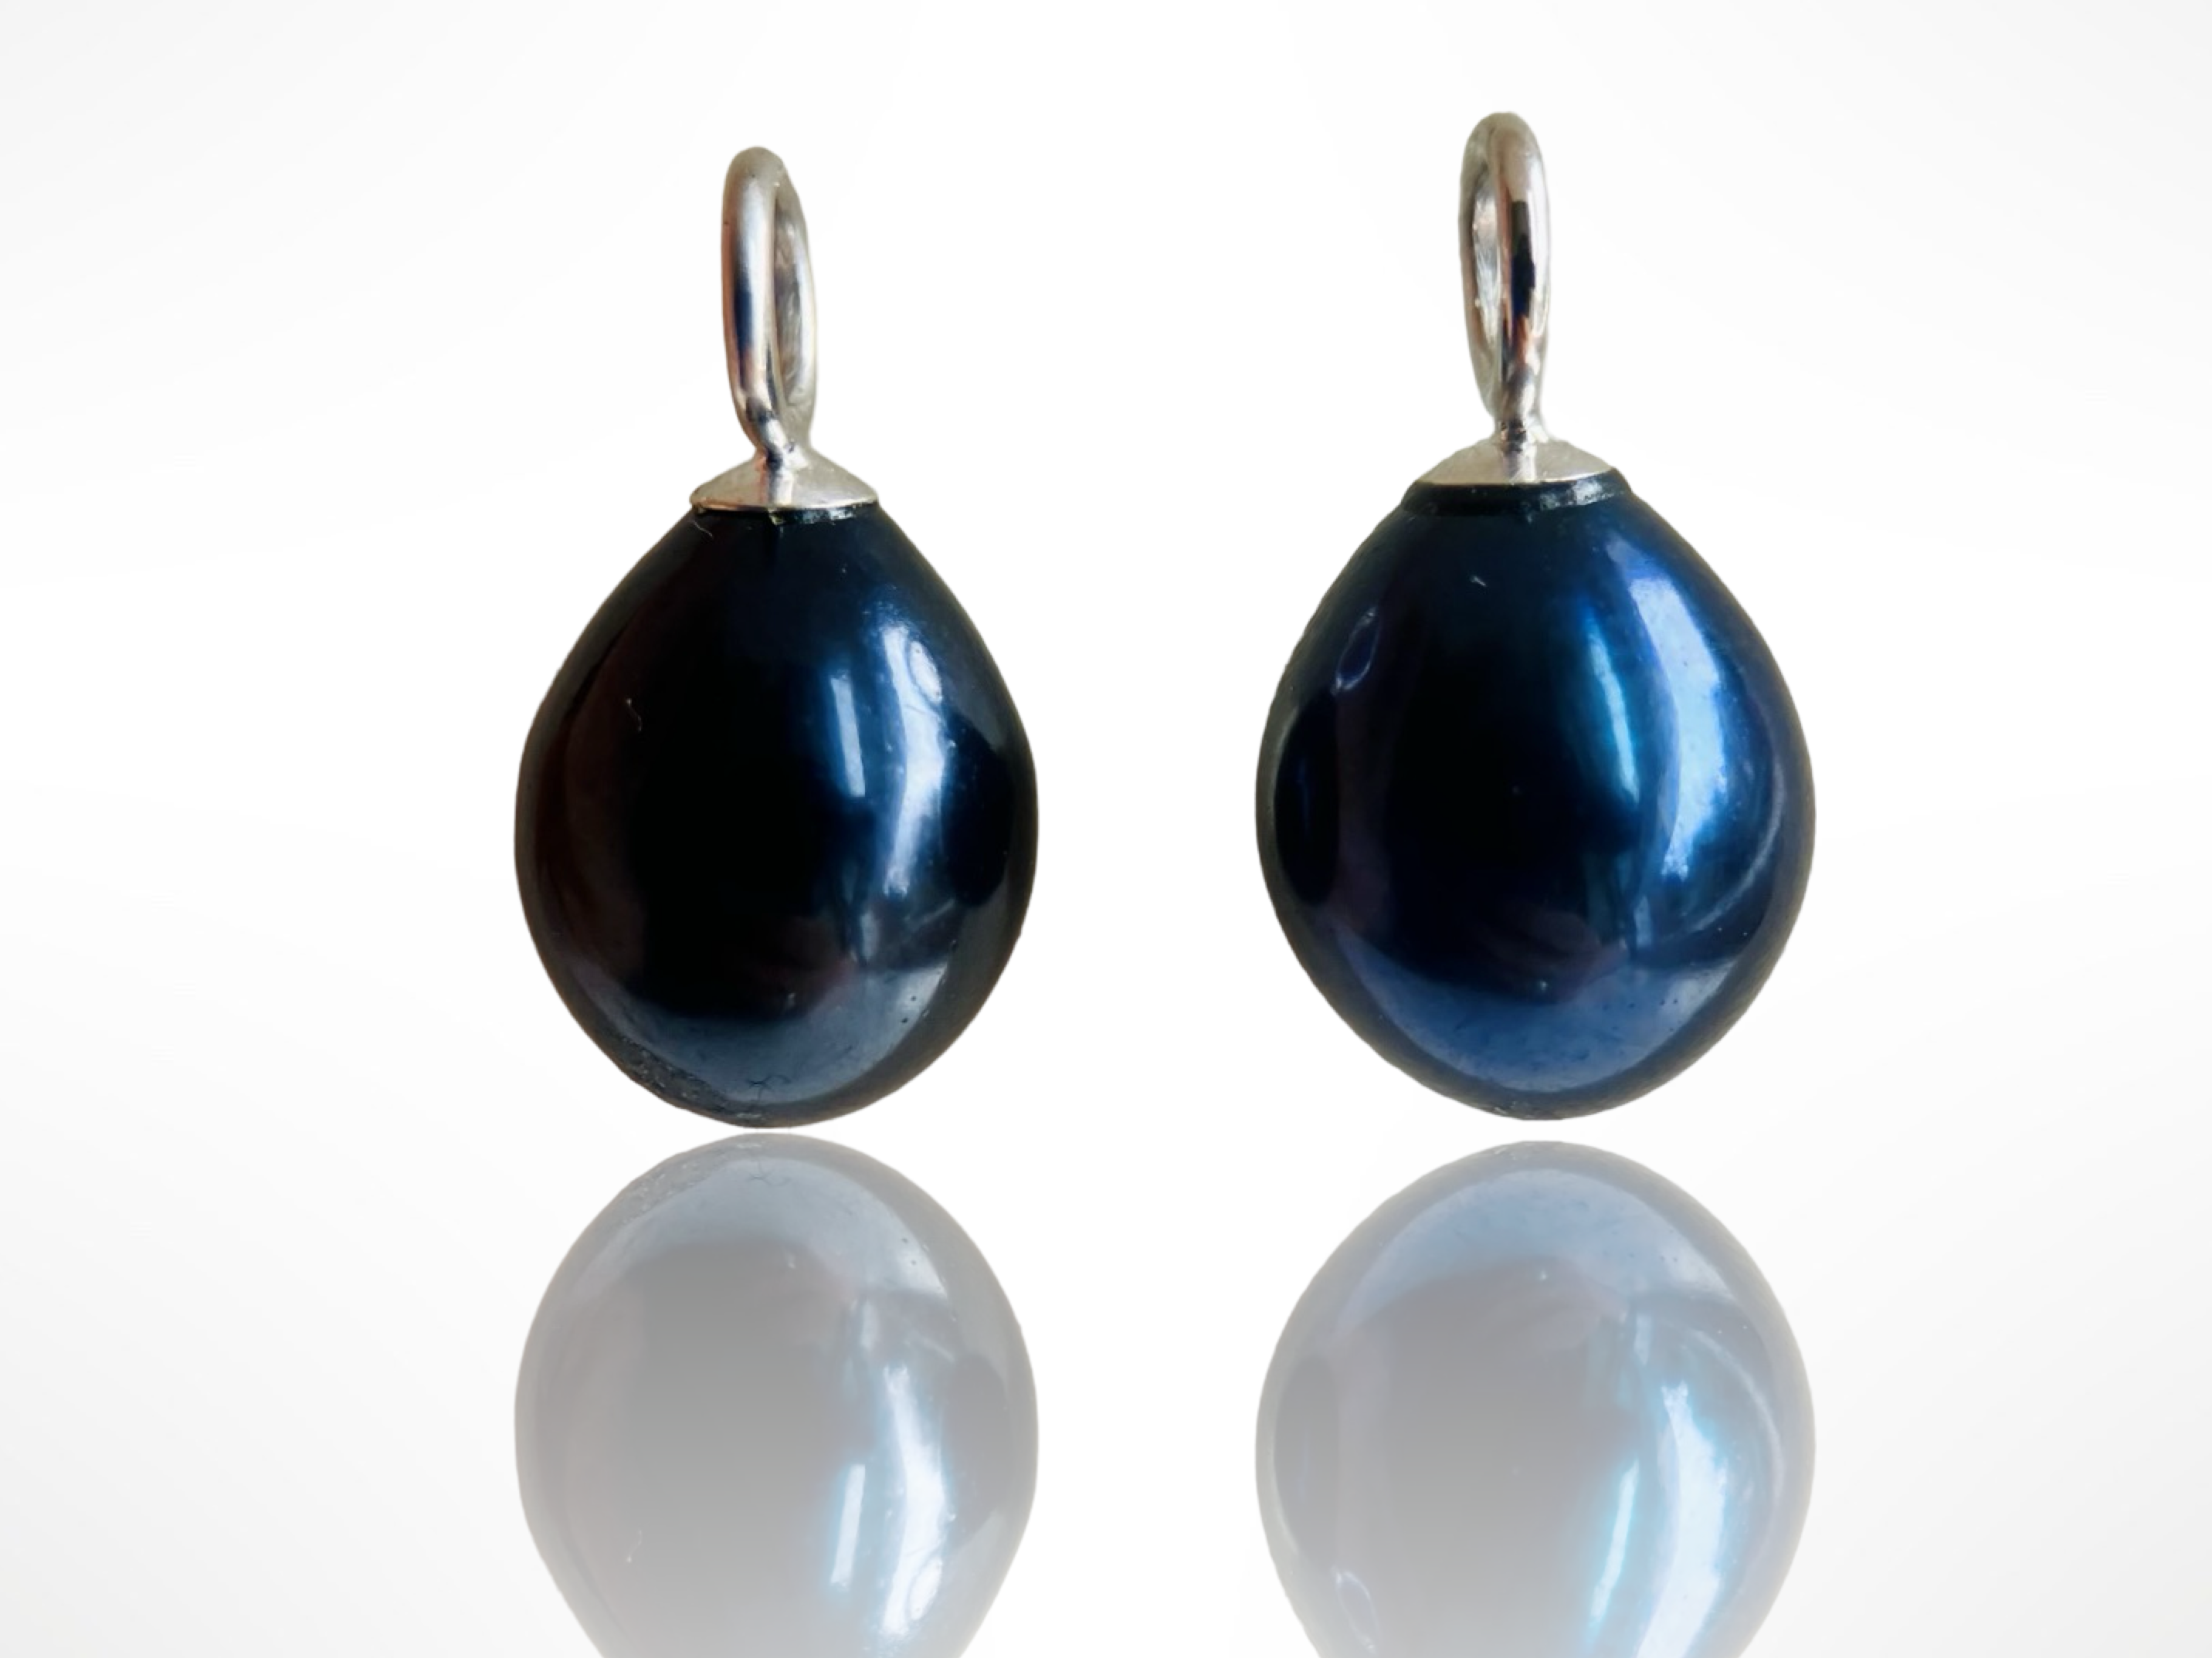 SOLD - HARMONY COLLECTION - A Pair of Midnight Blue Dyed Freshwater Cultured Pearl Drops